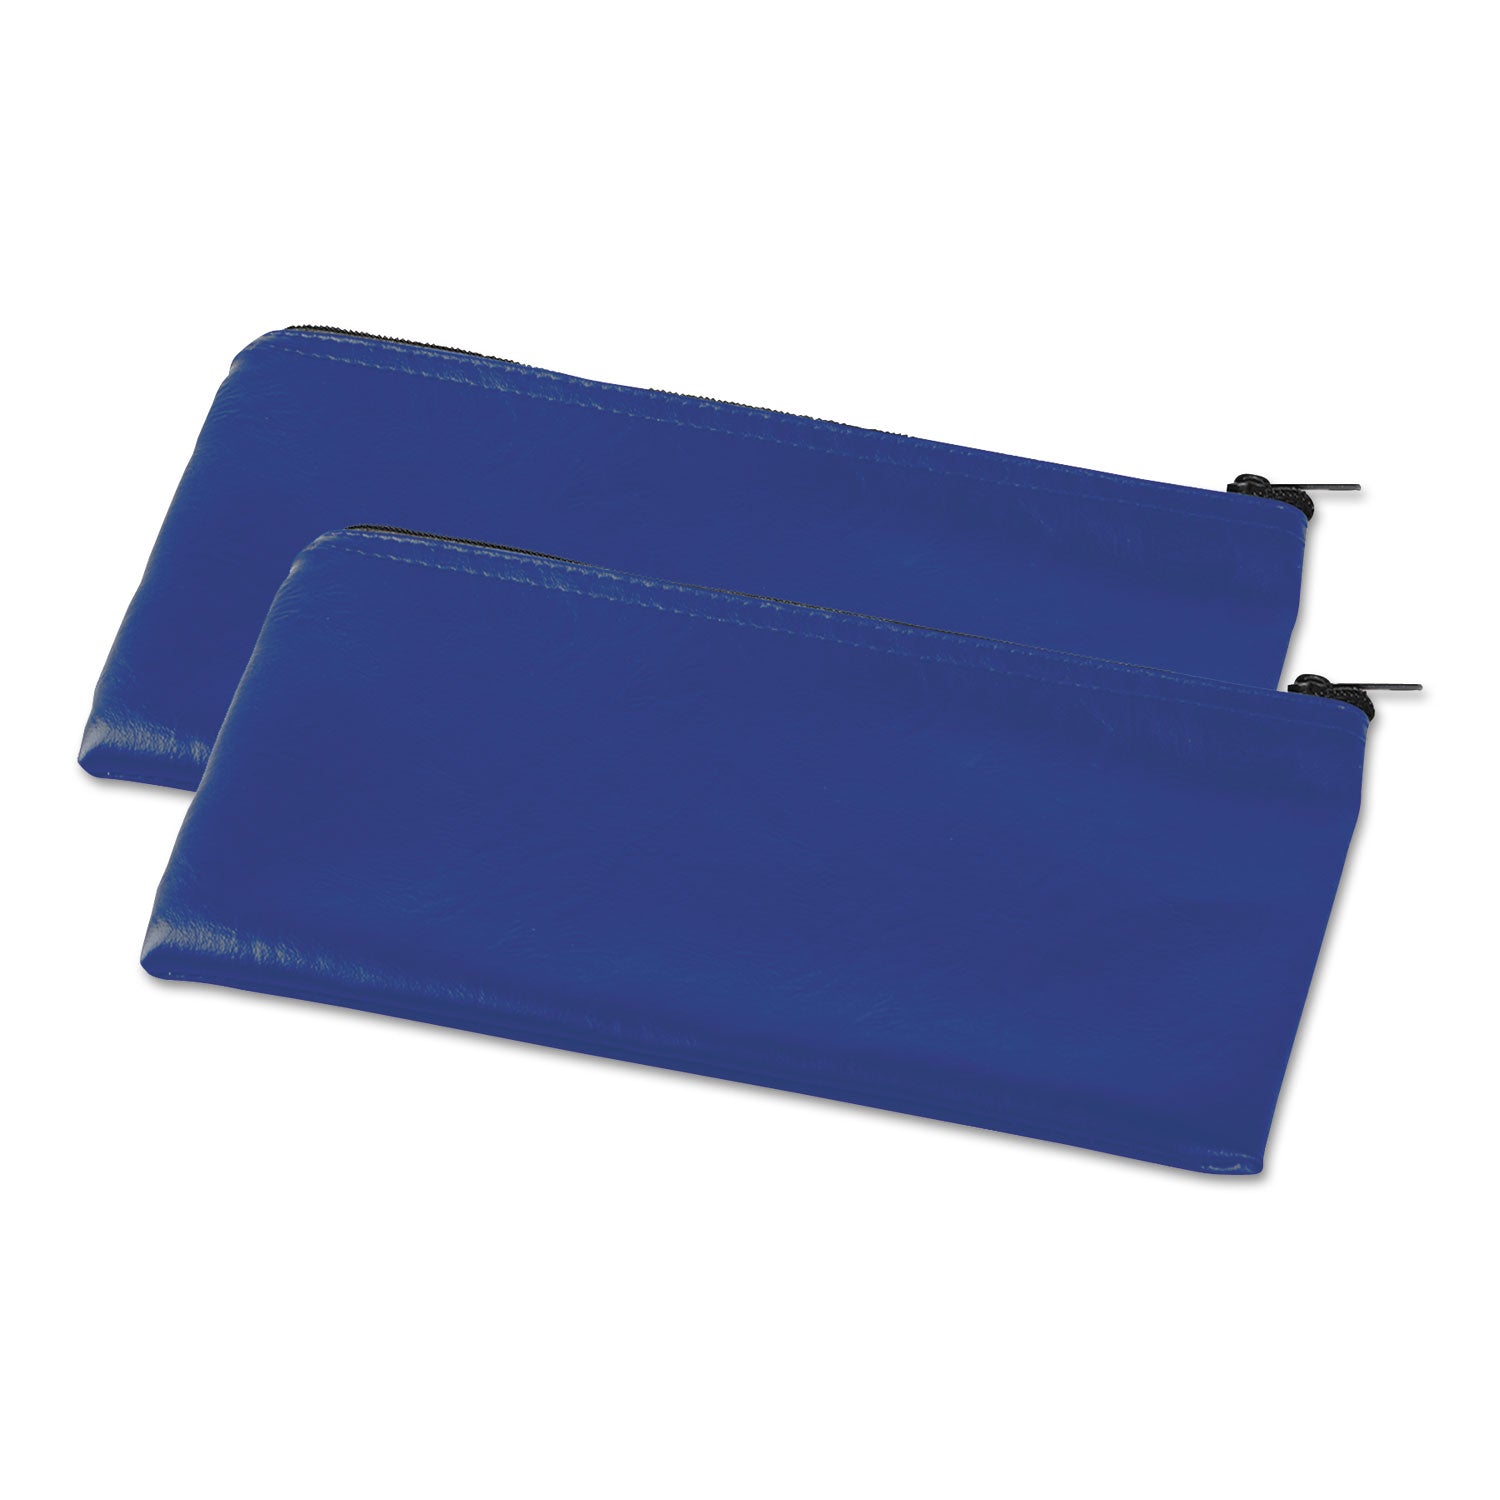 zippered-wallets-cases-leatherette-pu-11-x-6-blue-2-pack_unv69020 - 1